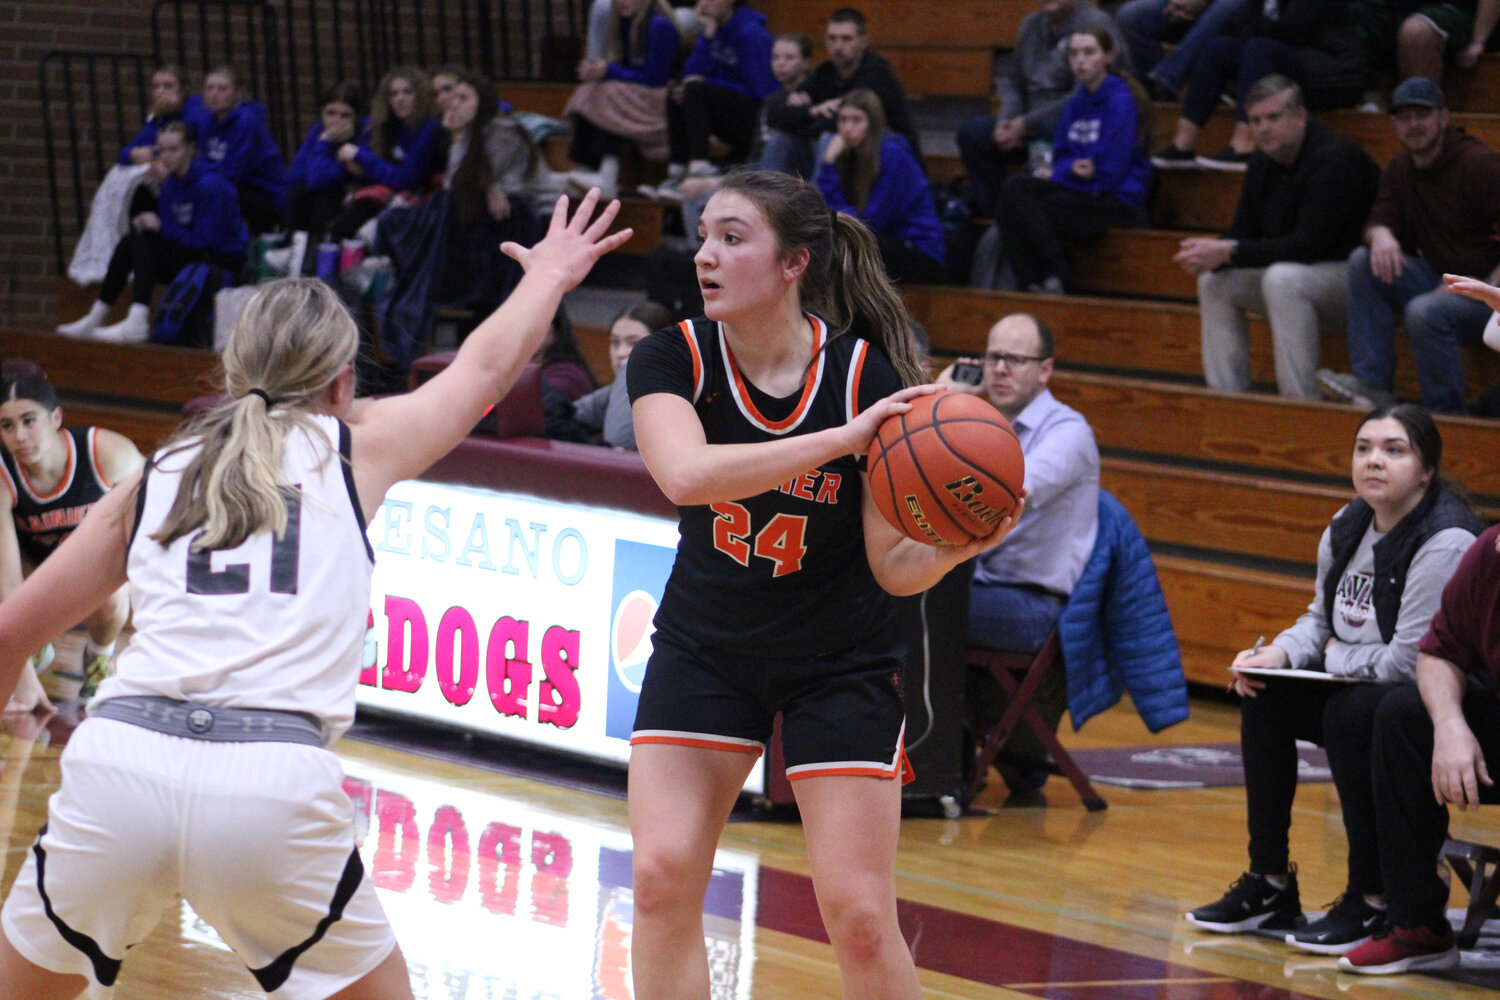 Bryn Beckman looks to pass to a teammate against Raymond-South Bend on Feb. 6.